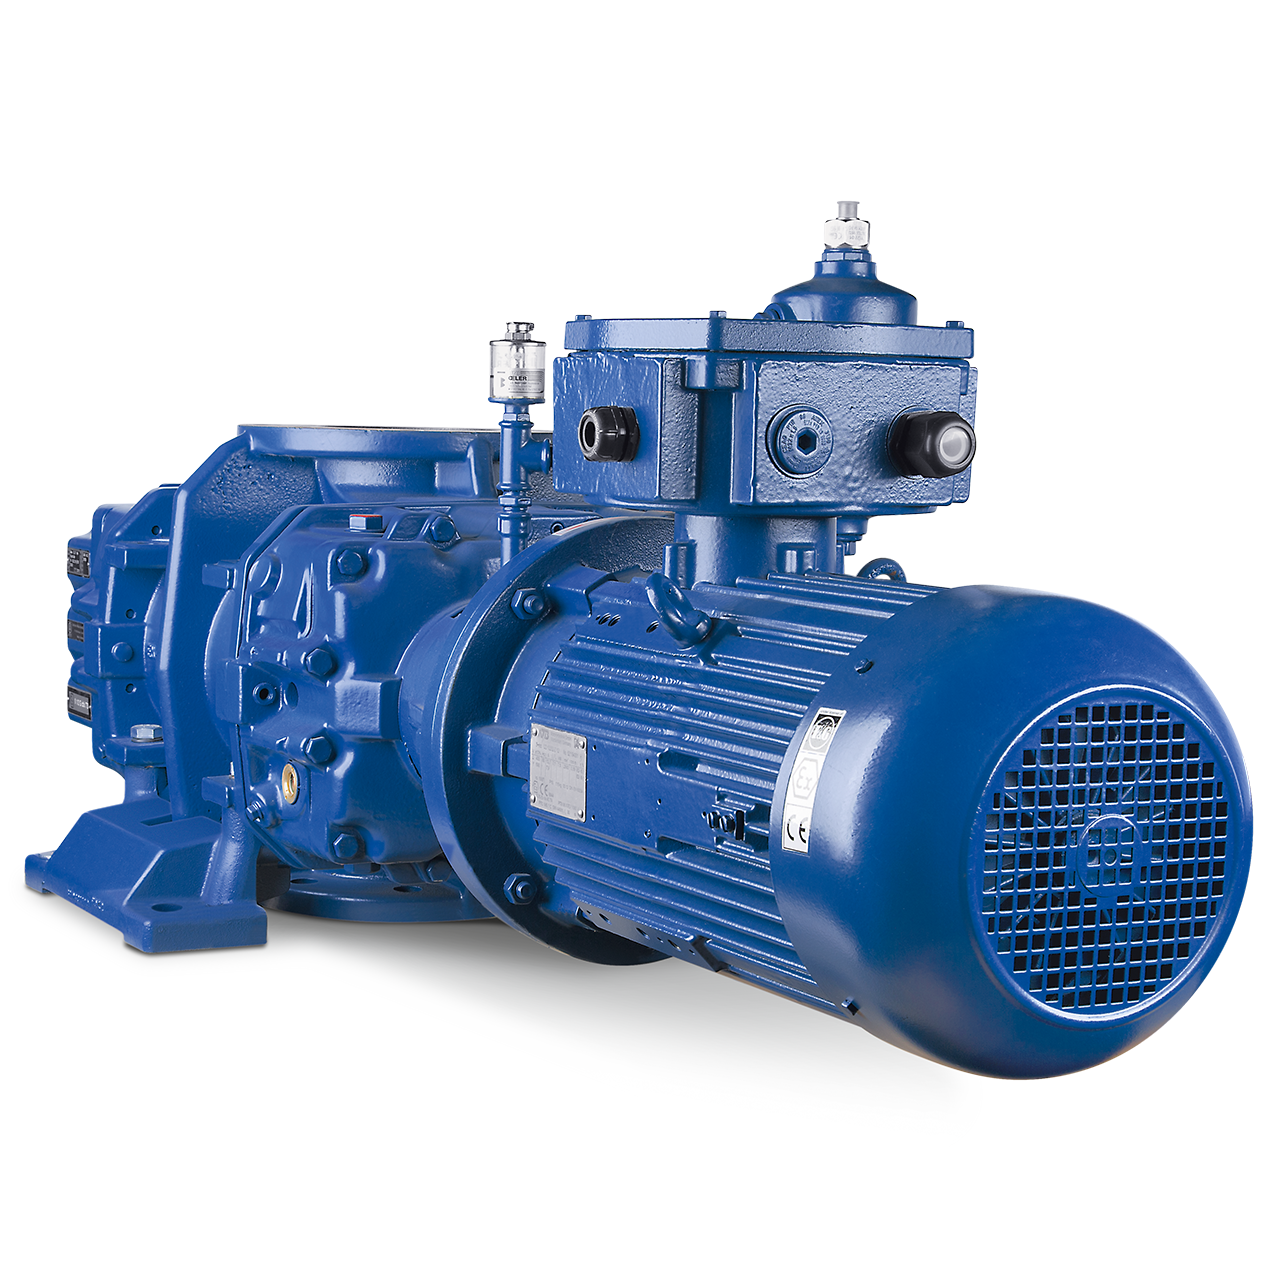 [Translate to English US:] High vacuum blower HV series front view